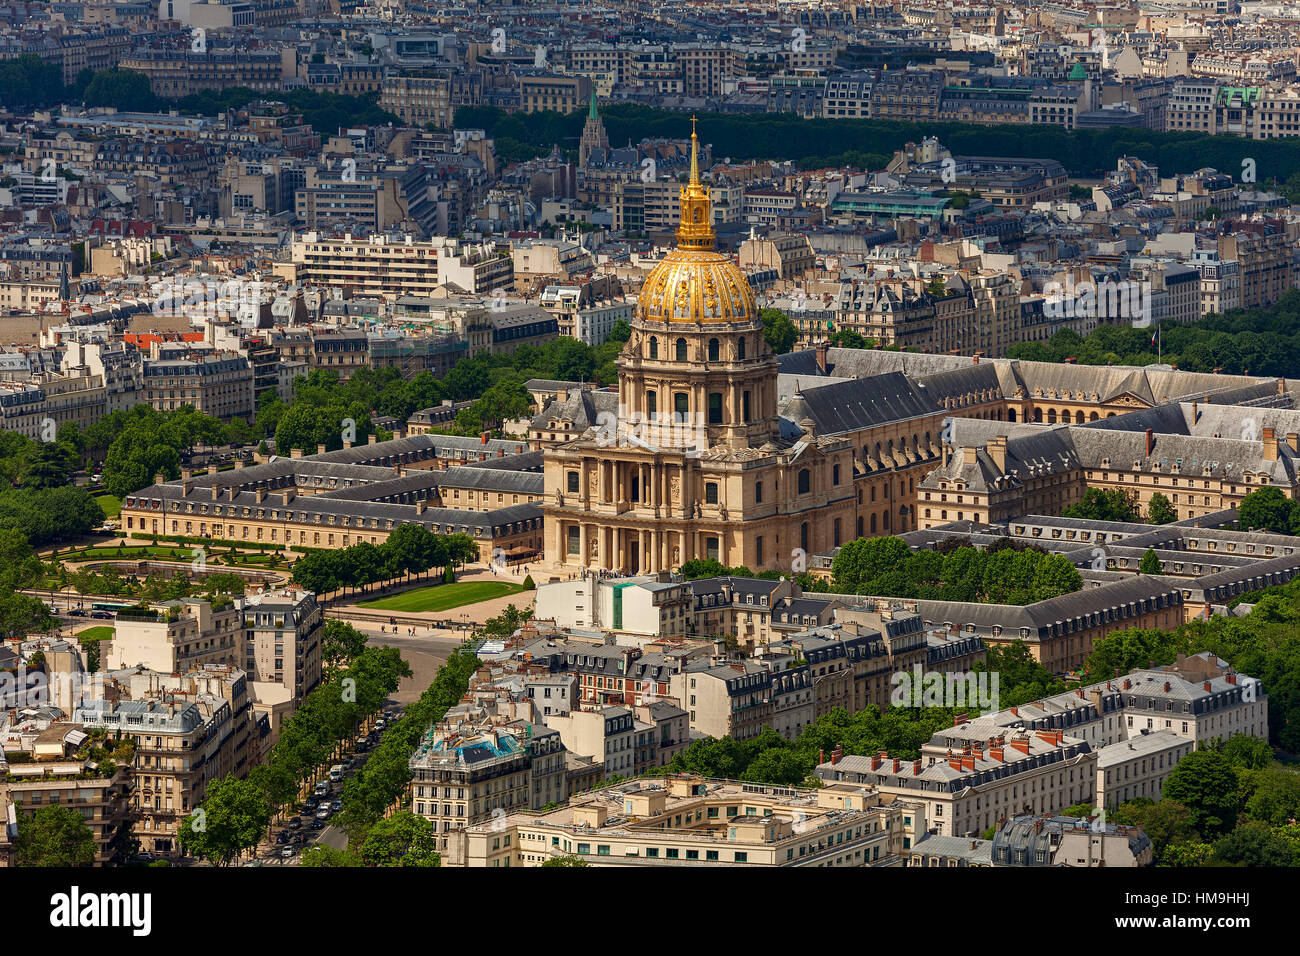 View from above of Les Invalides and buildings in Paris, France. Stock Photo